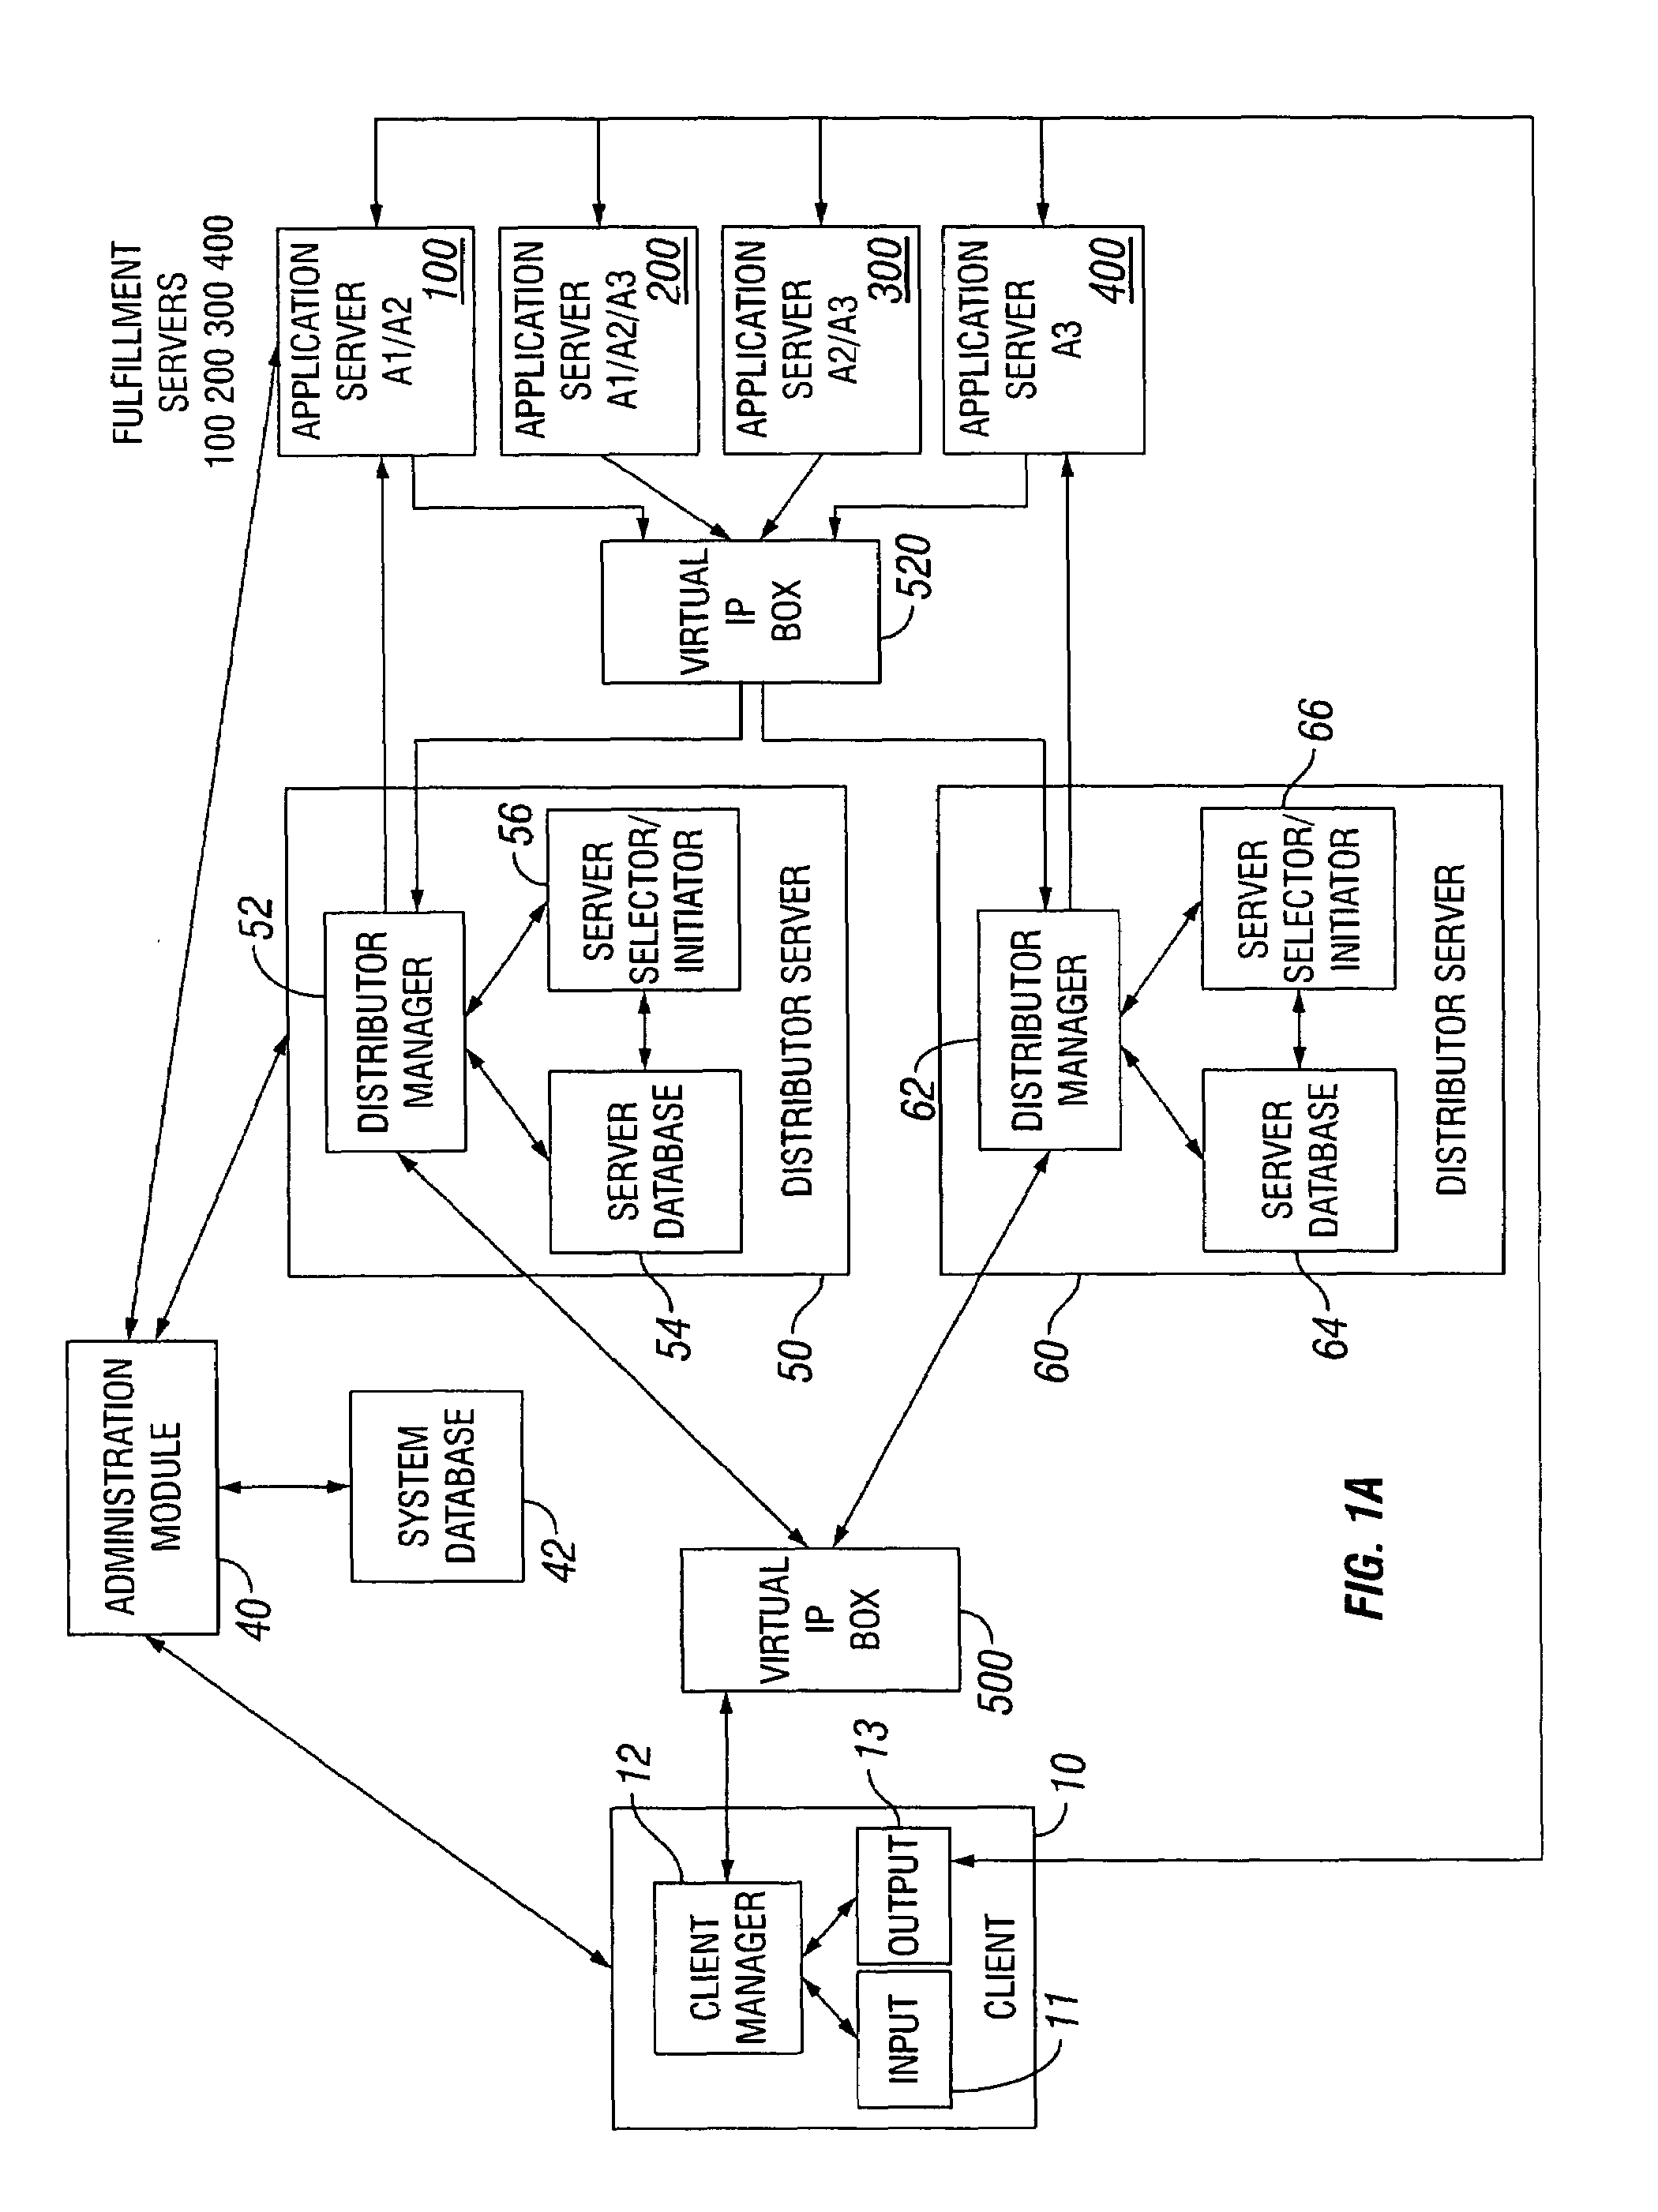 Dynamic allocation of computing tasks by second distributed server set